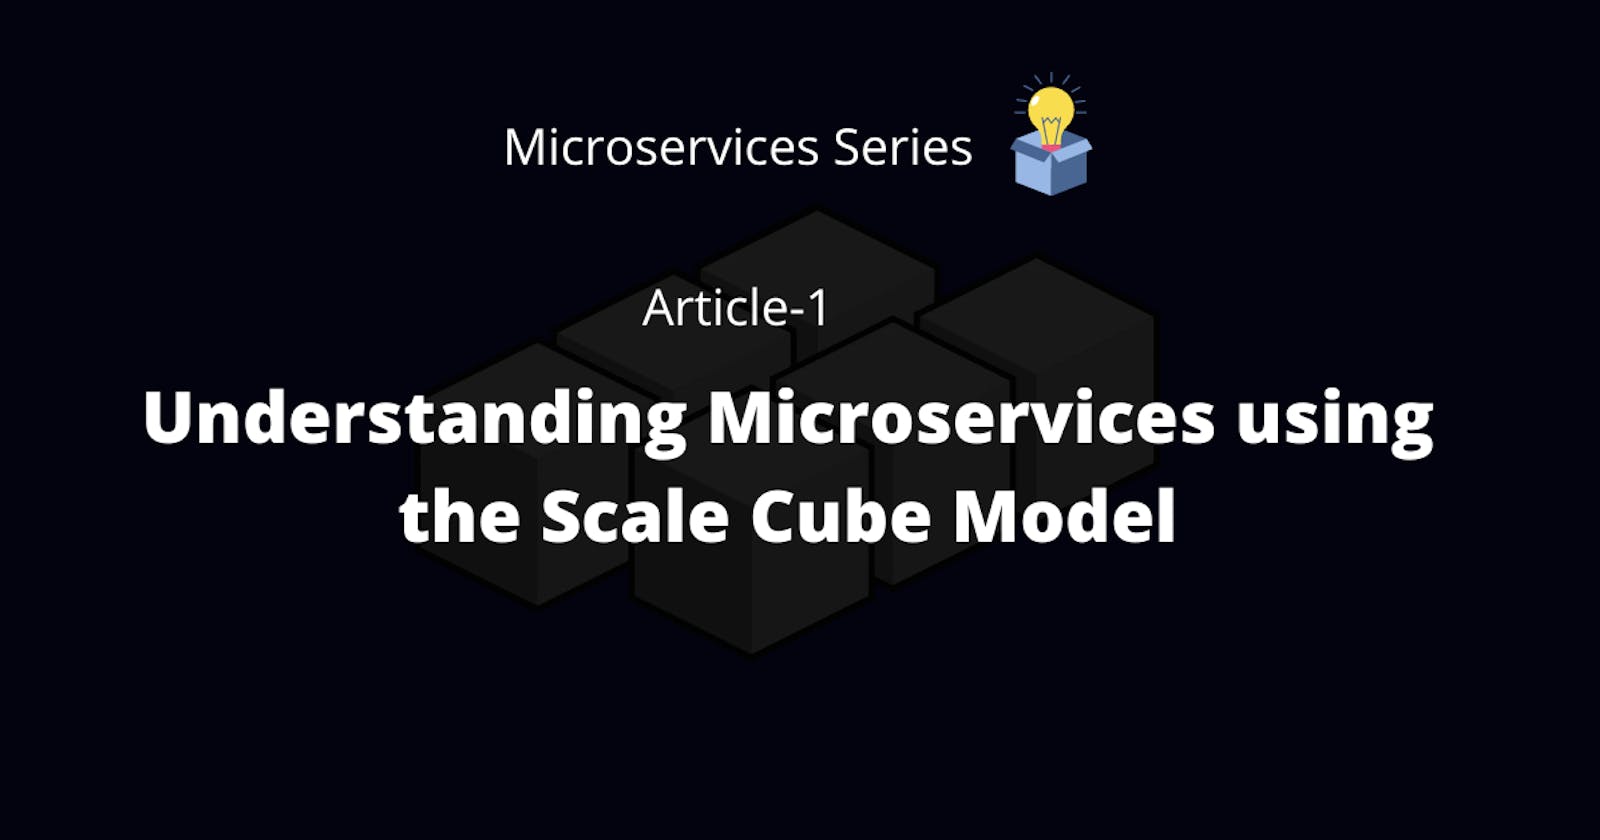 Understanding Microservices using the Scale Cube Model